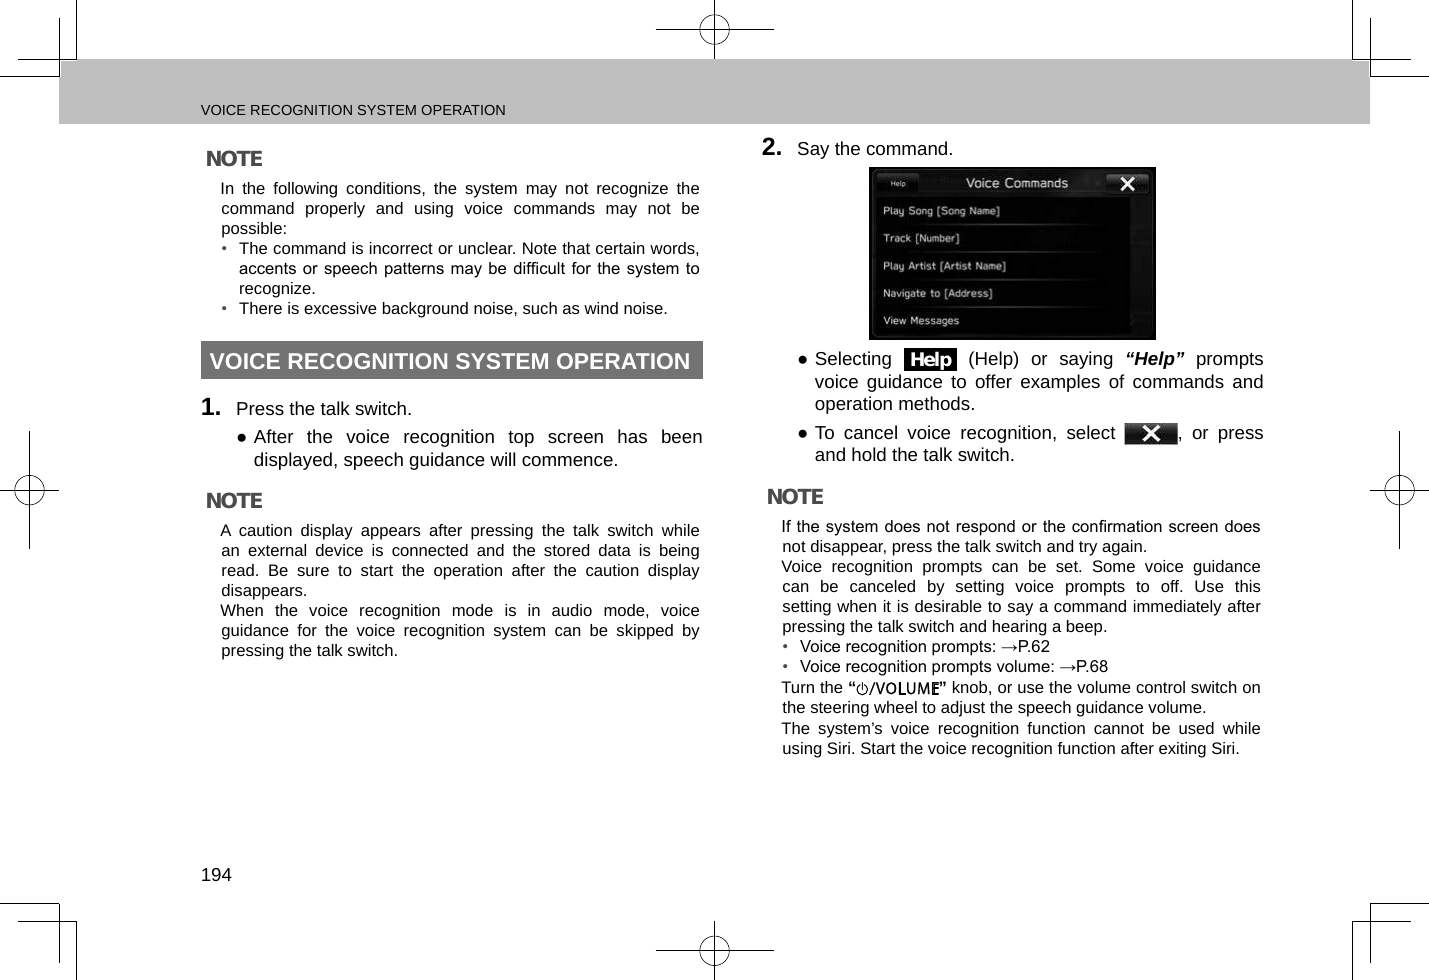 Page 195 of Harman BE2818 Automotive Infotainment Unit with Bluetooth User Manual 